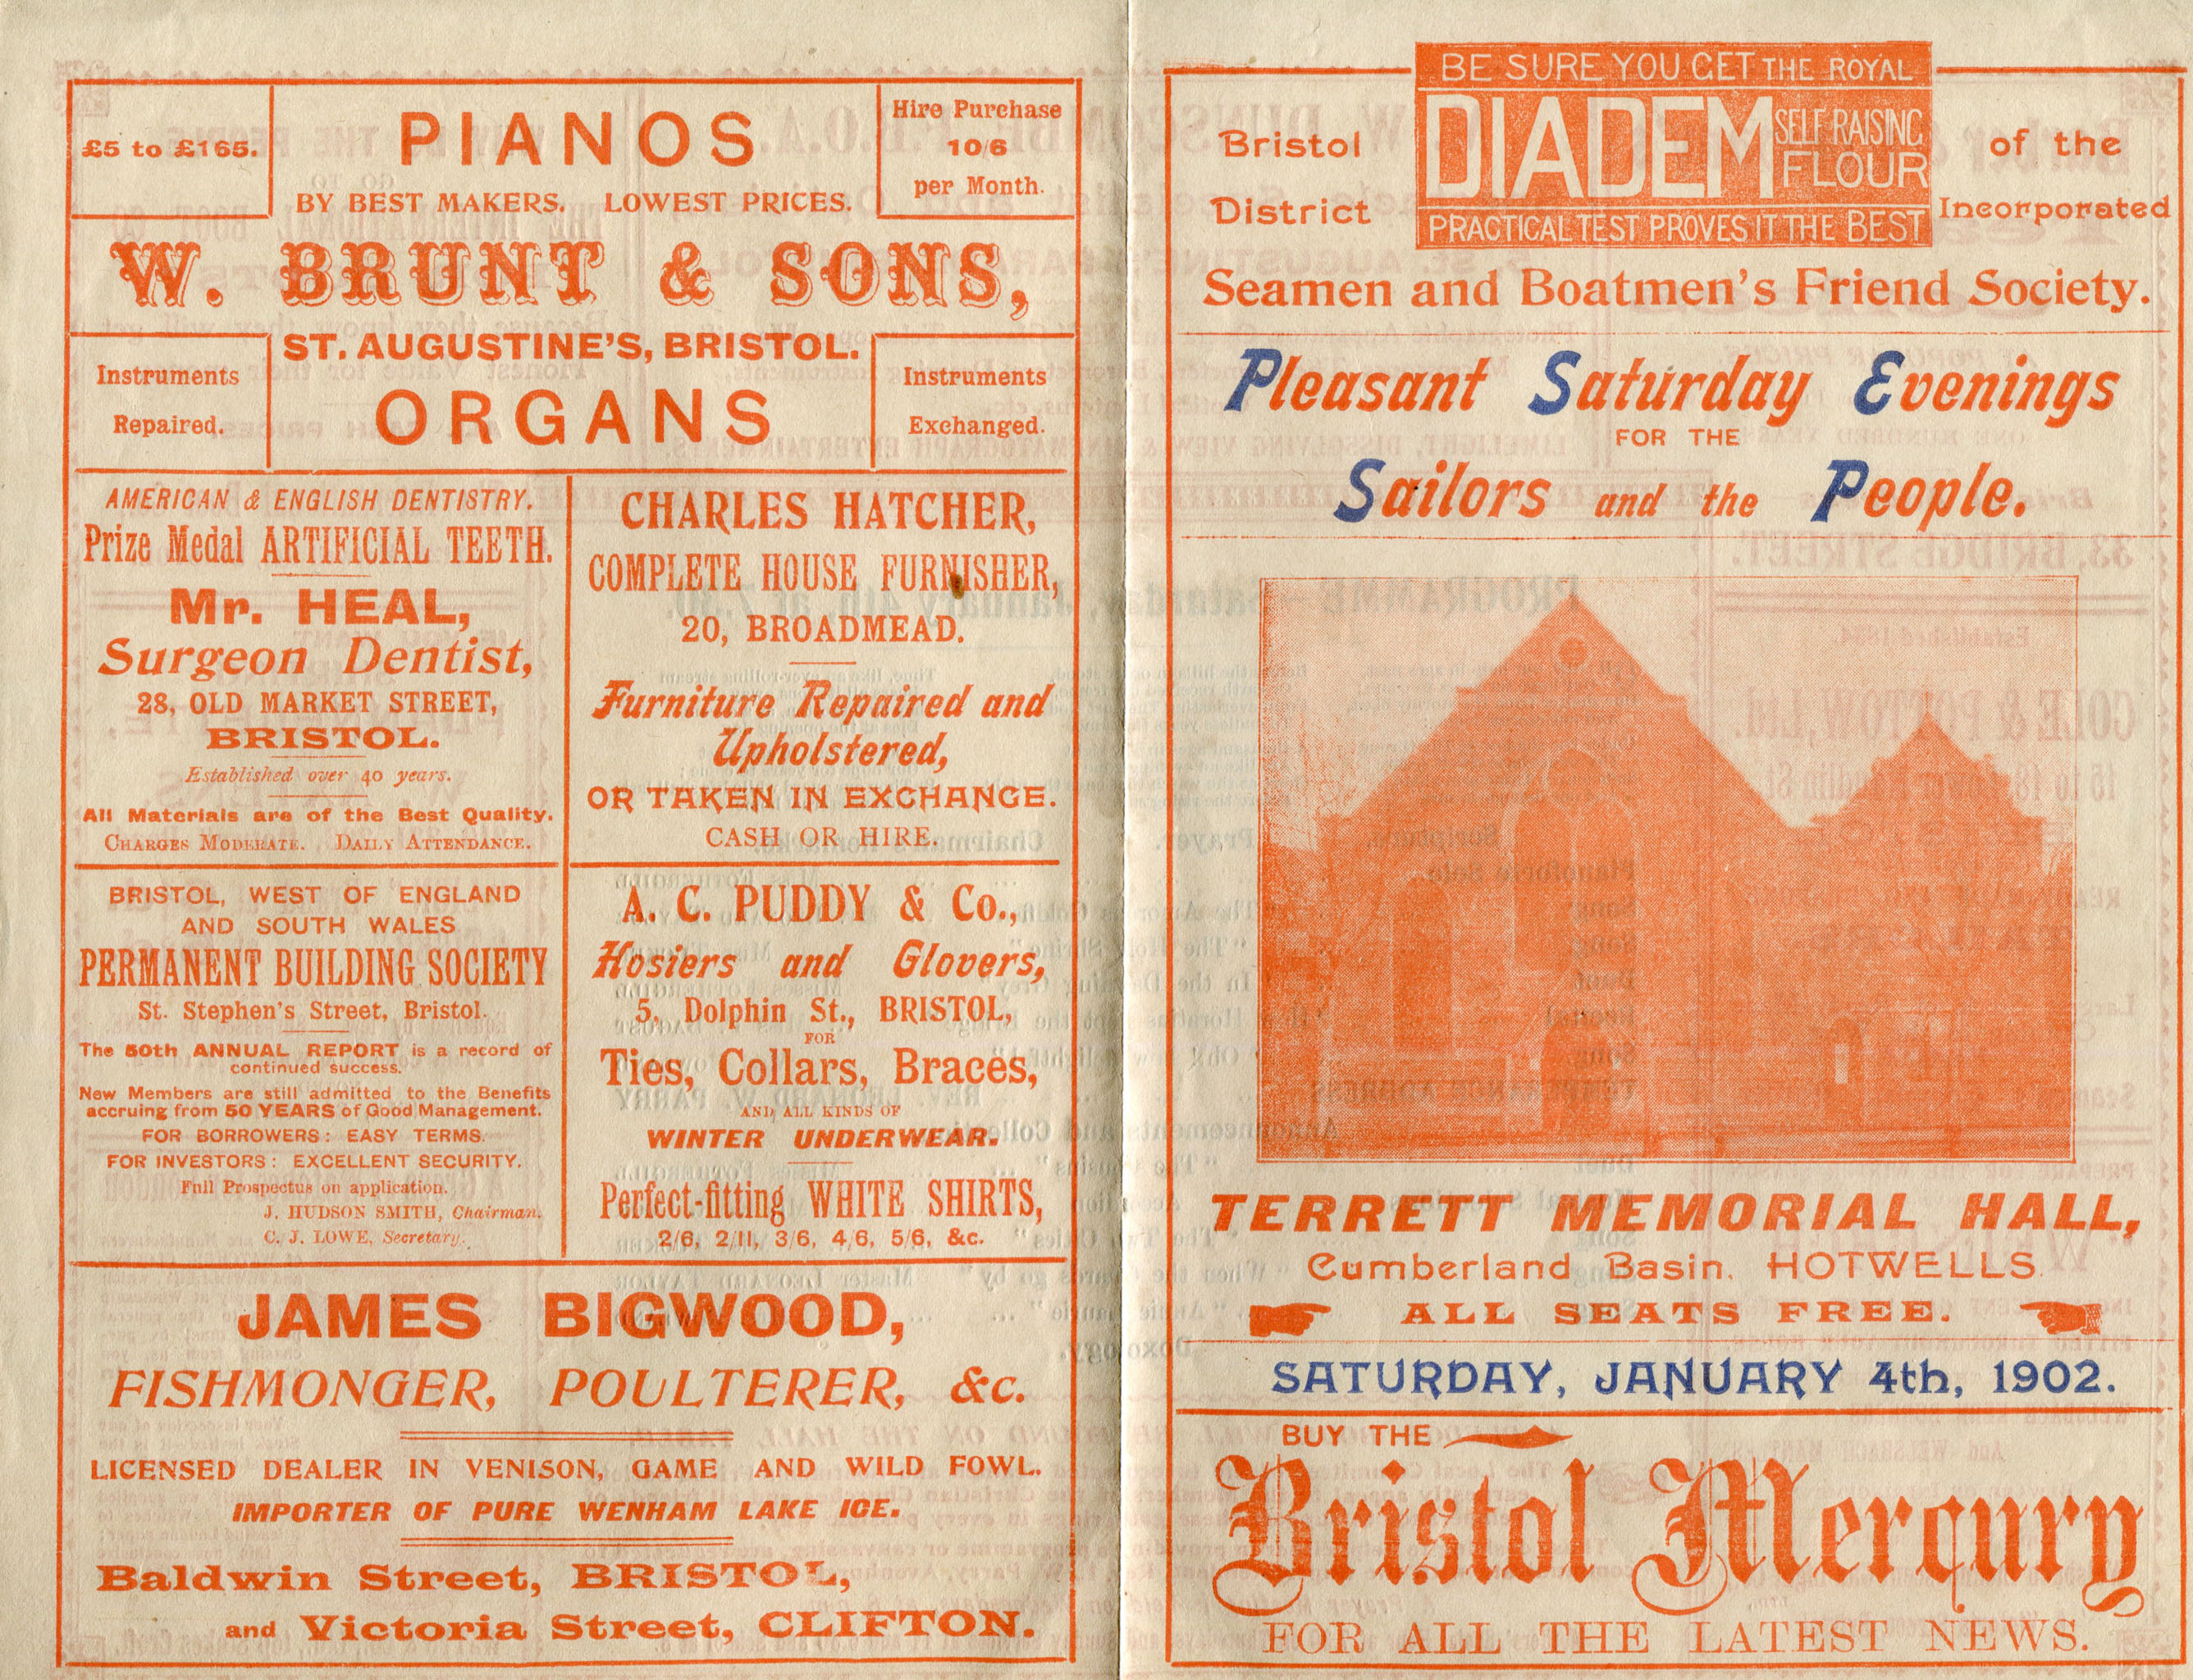 Terrett Memorial Hall 1902 Flyer 1
This was my random eBay purchase. I had no idea that the Terrett Memorial Hall had ever existed until I saw this leaflet up for sale.

There's some...